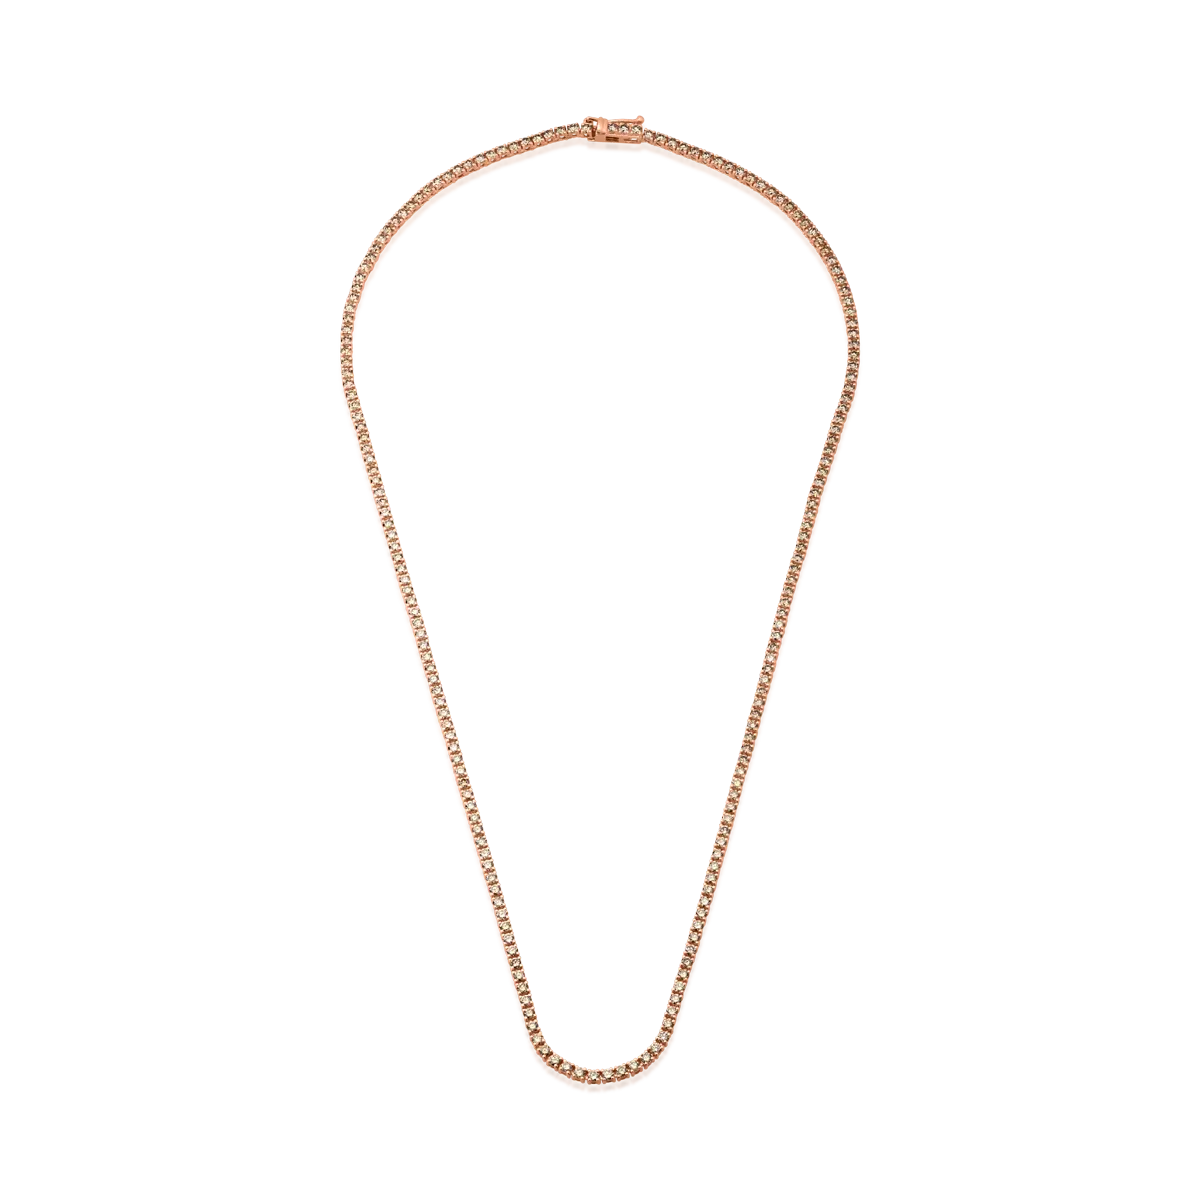 18K rose gold tennis necklace with 4.3ct brown diamonds